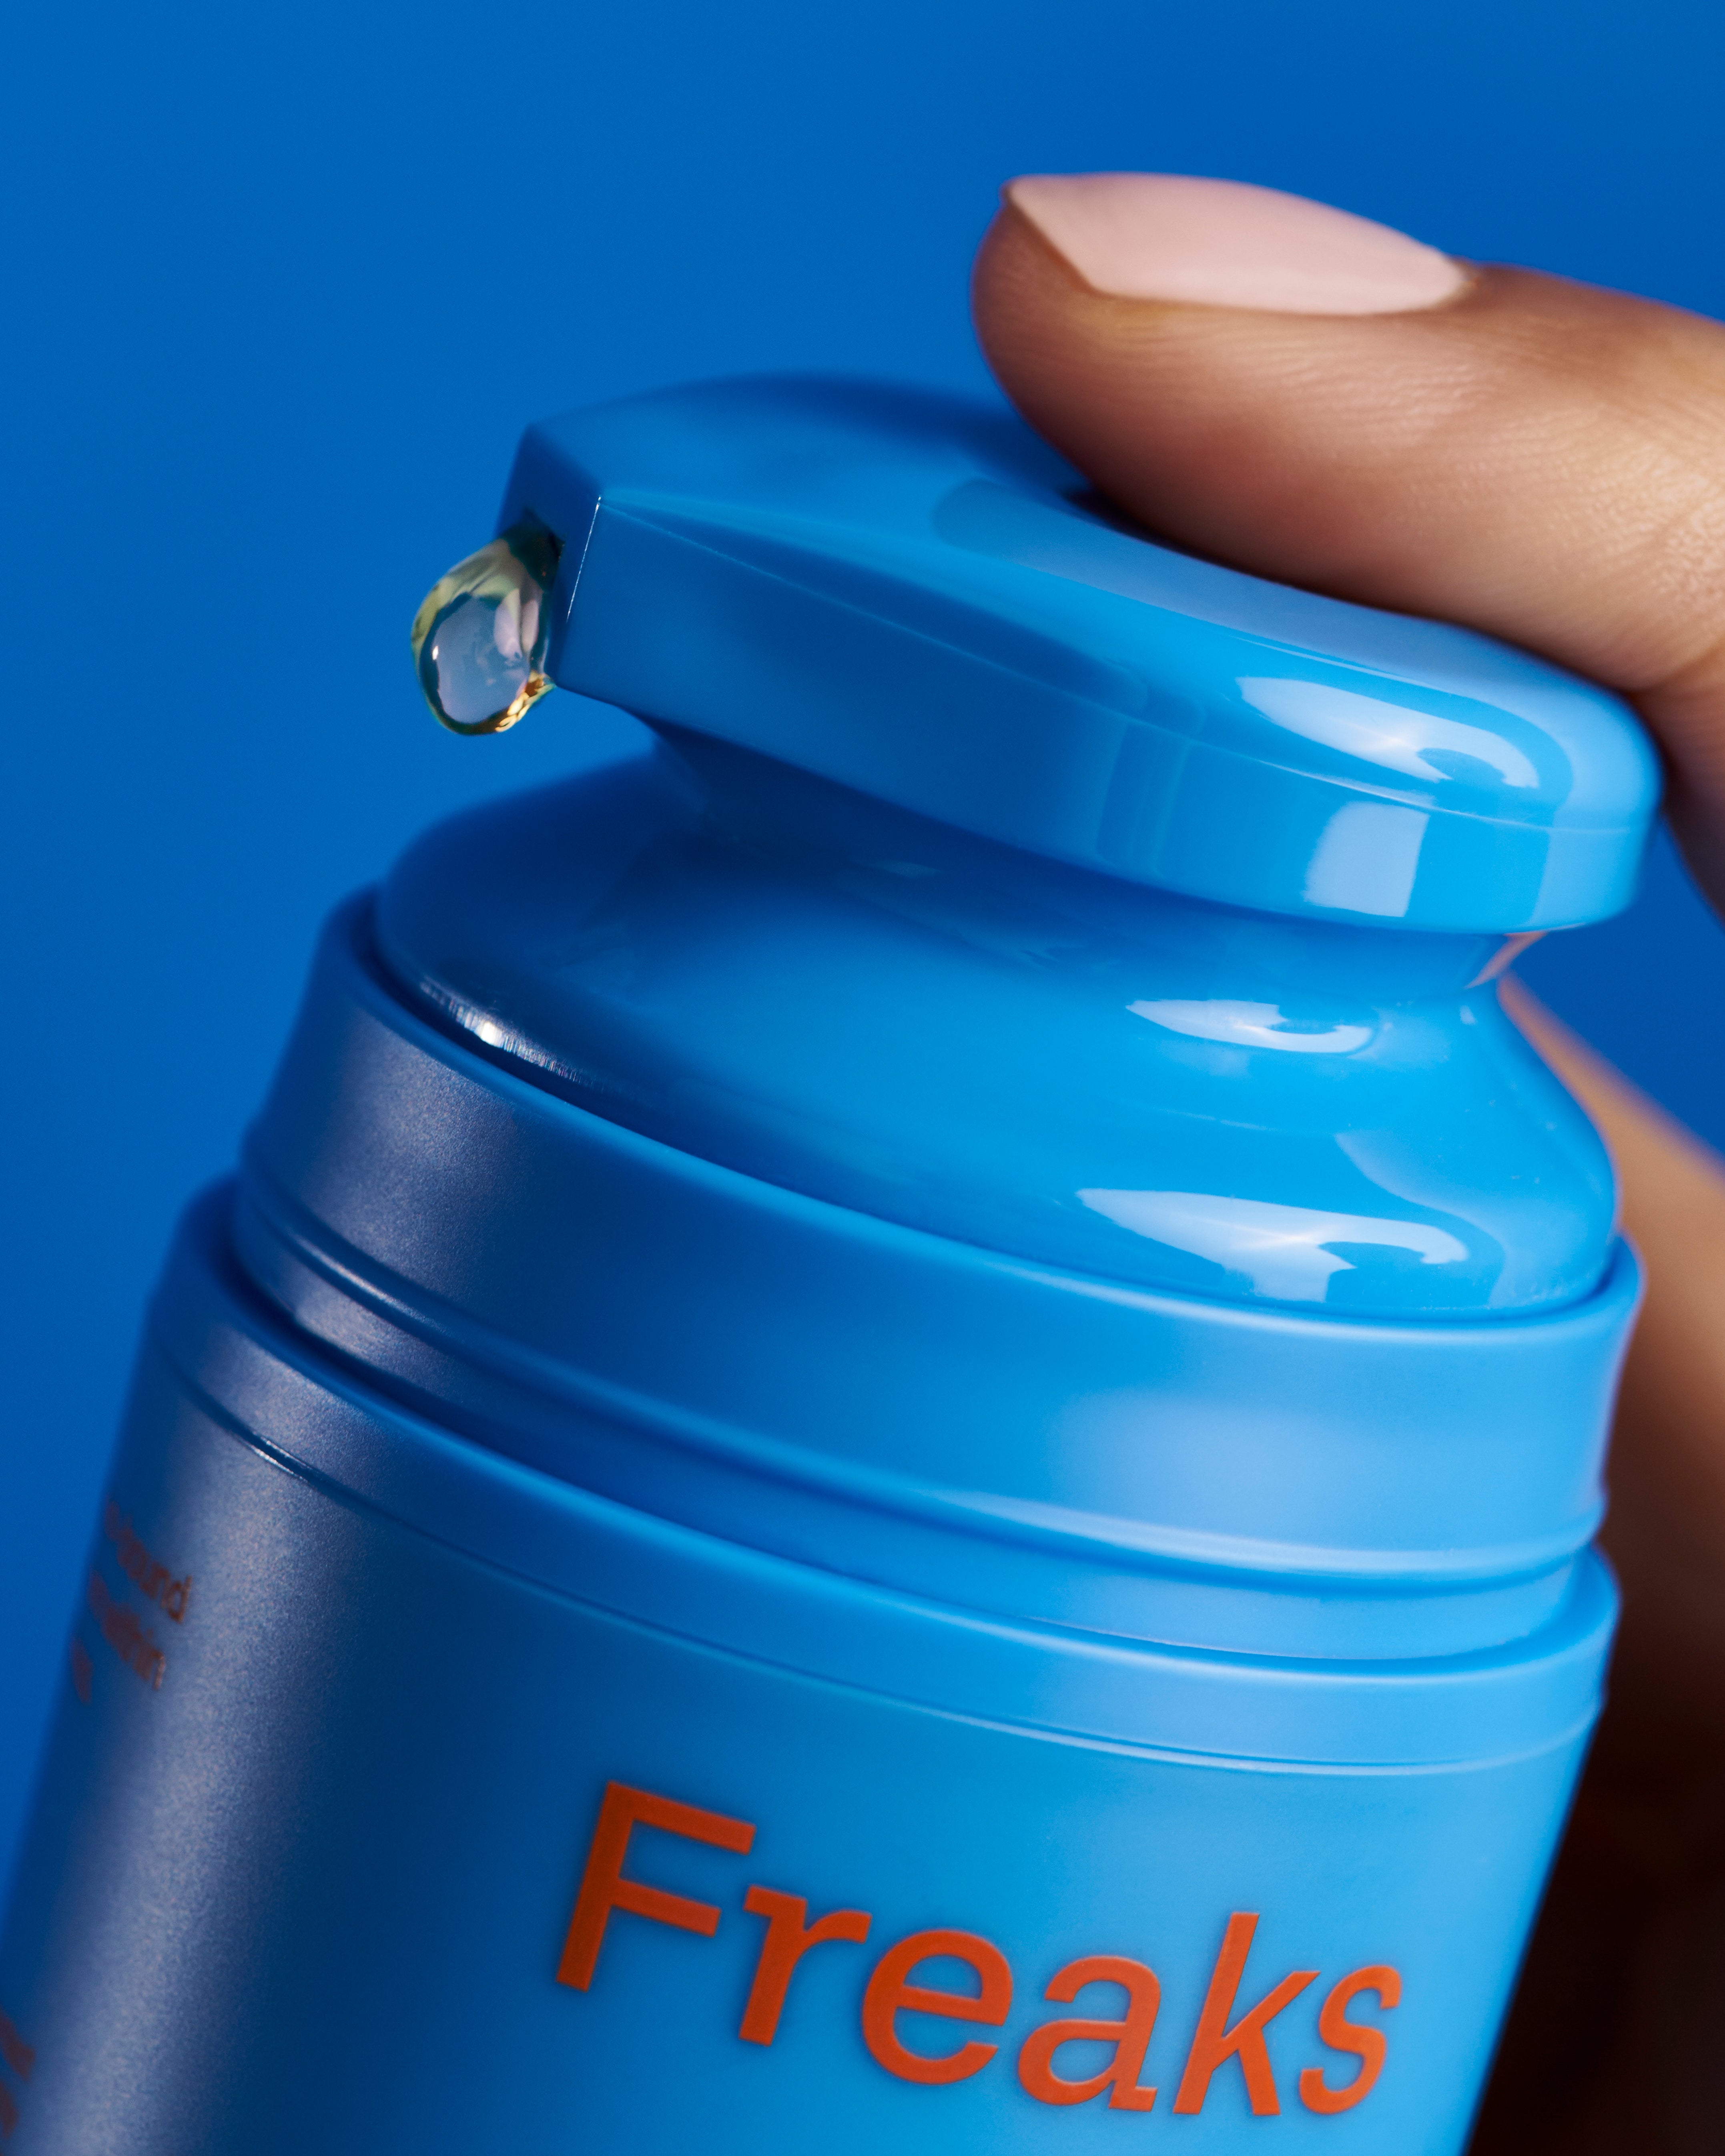 A close-up of a hand holding a blue cylindrical bottle labeled "Freaks of Nature Skincare," which contains Deeper Dive Moisturizer. A clear liquid droplet is visible at the opening of the bottle's cap. The background is a solid blue color, emphasizing its microbiome-balancing moisturizing serum inside.